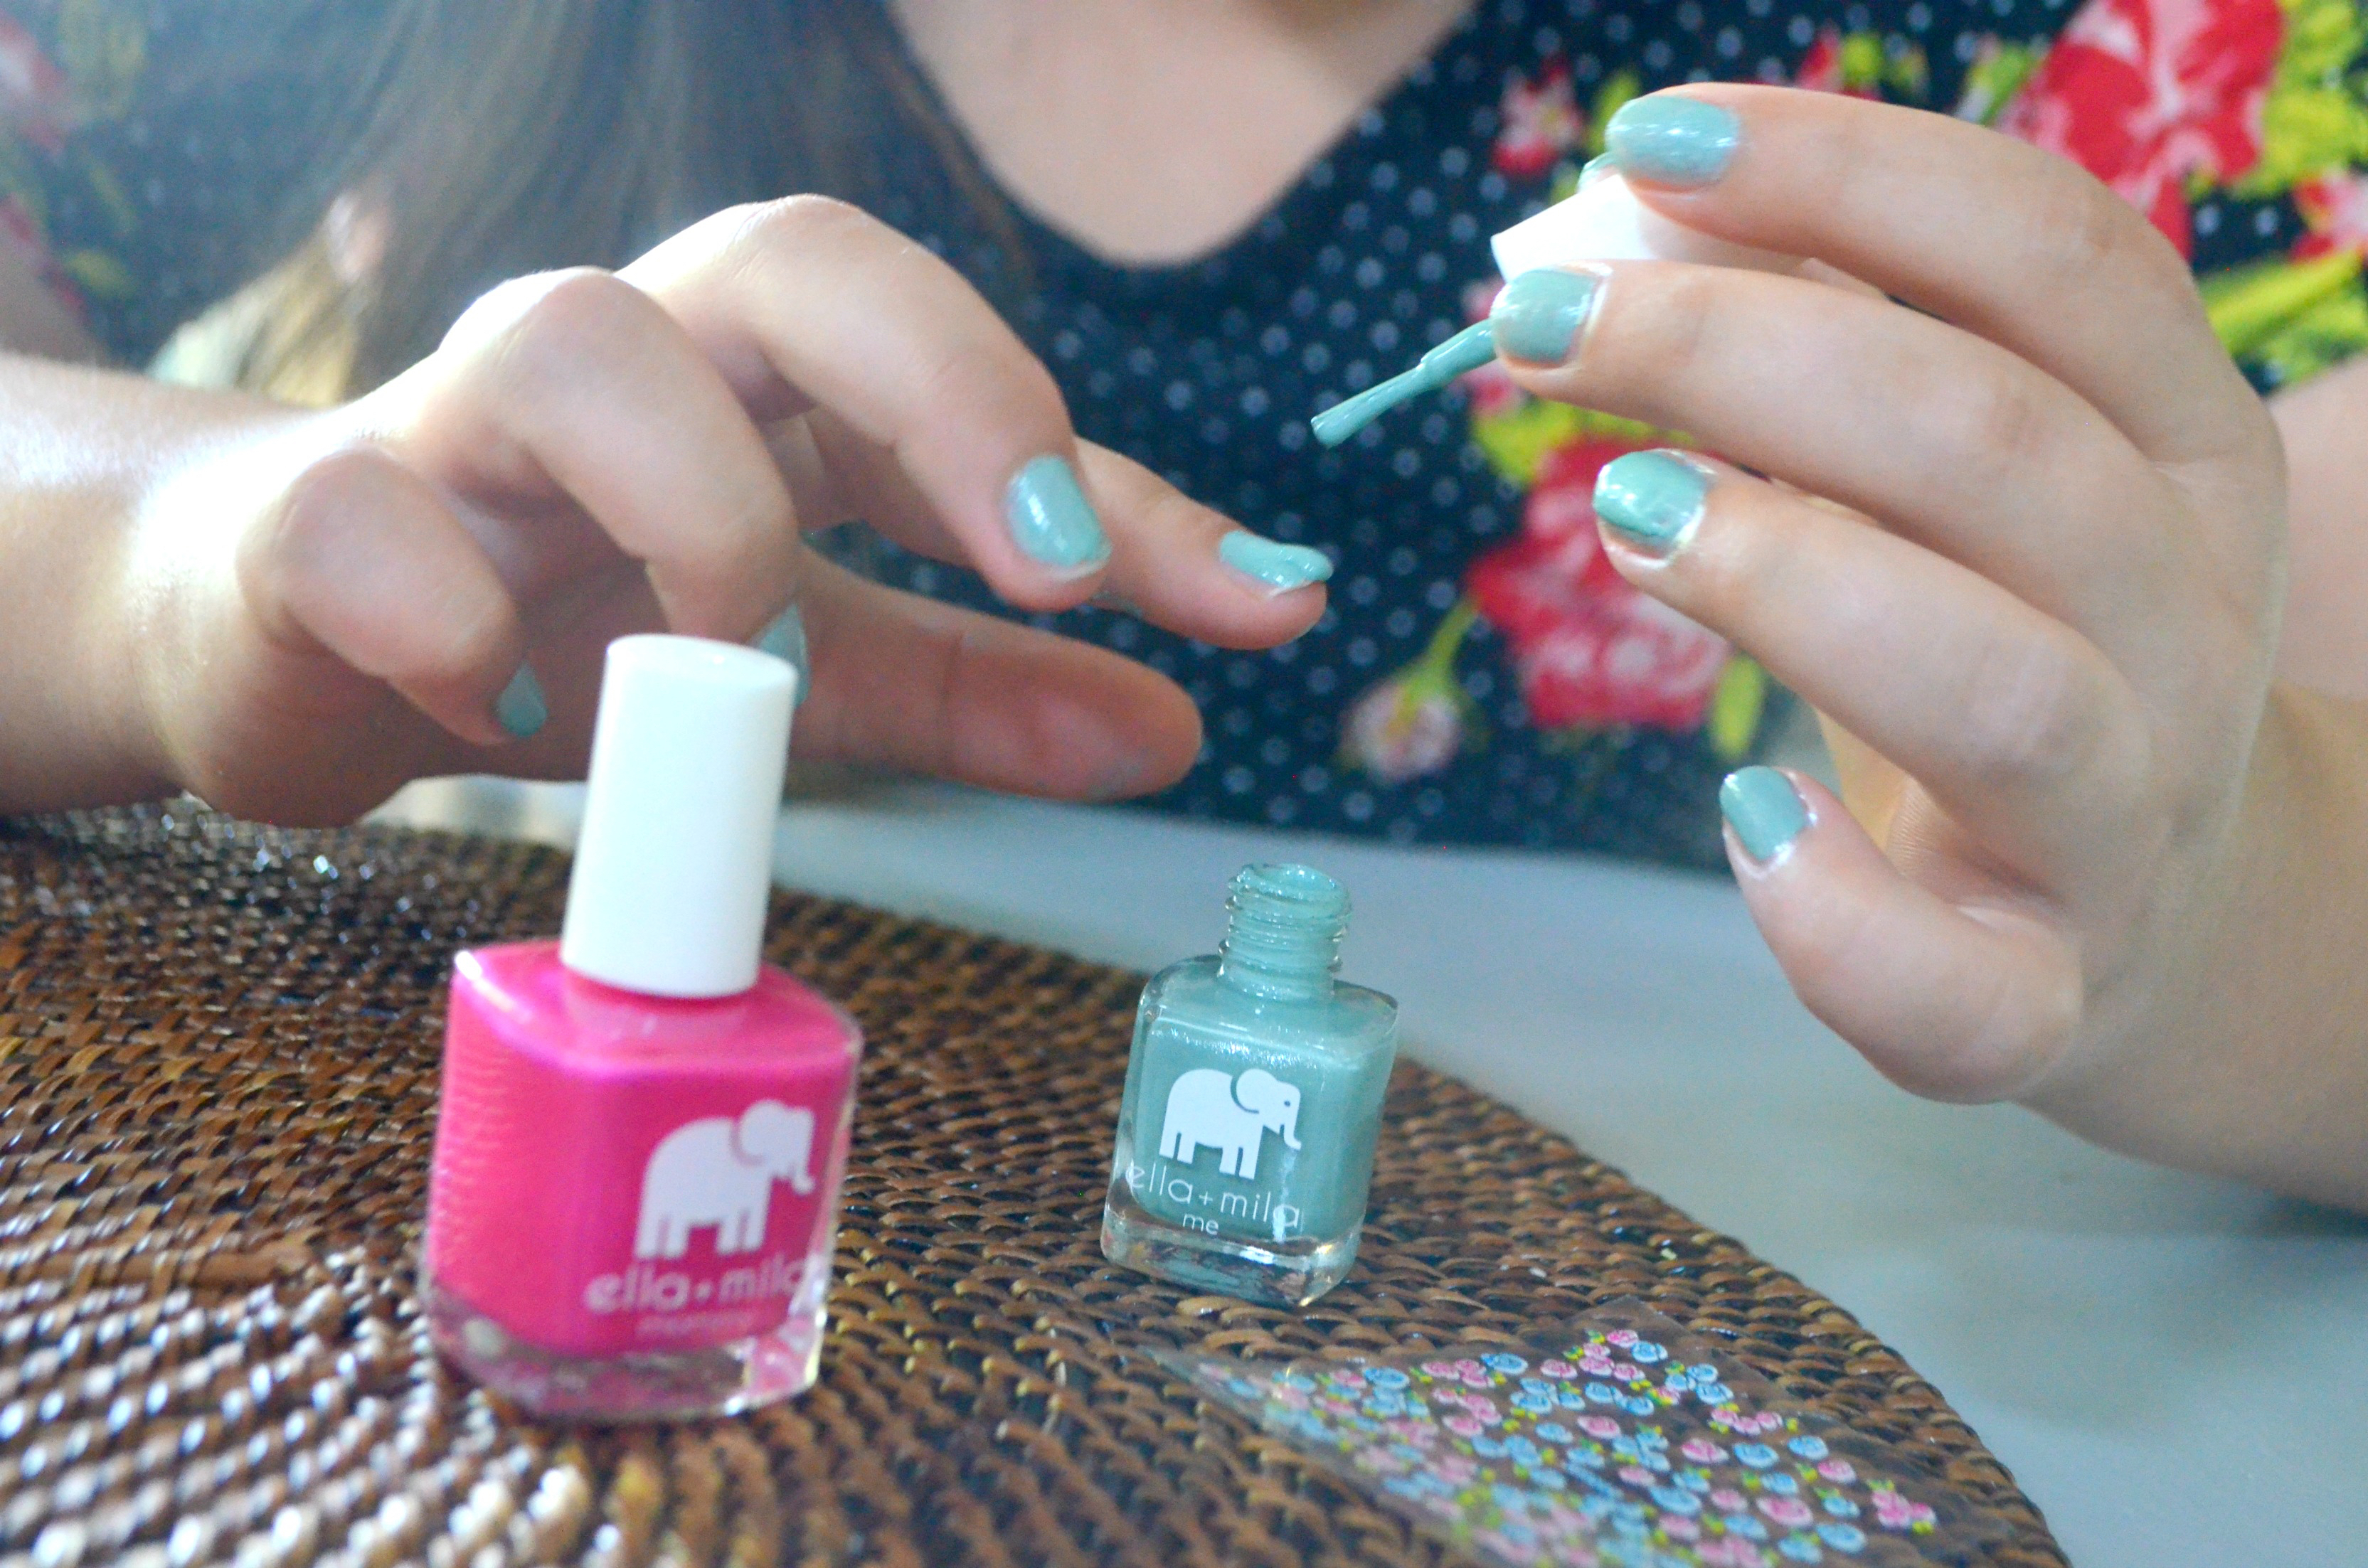 ella mila nail products deal - young girl painting her nails